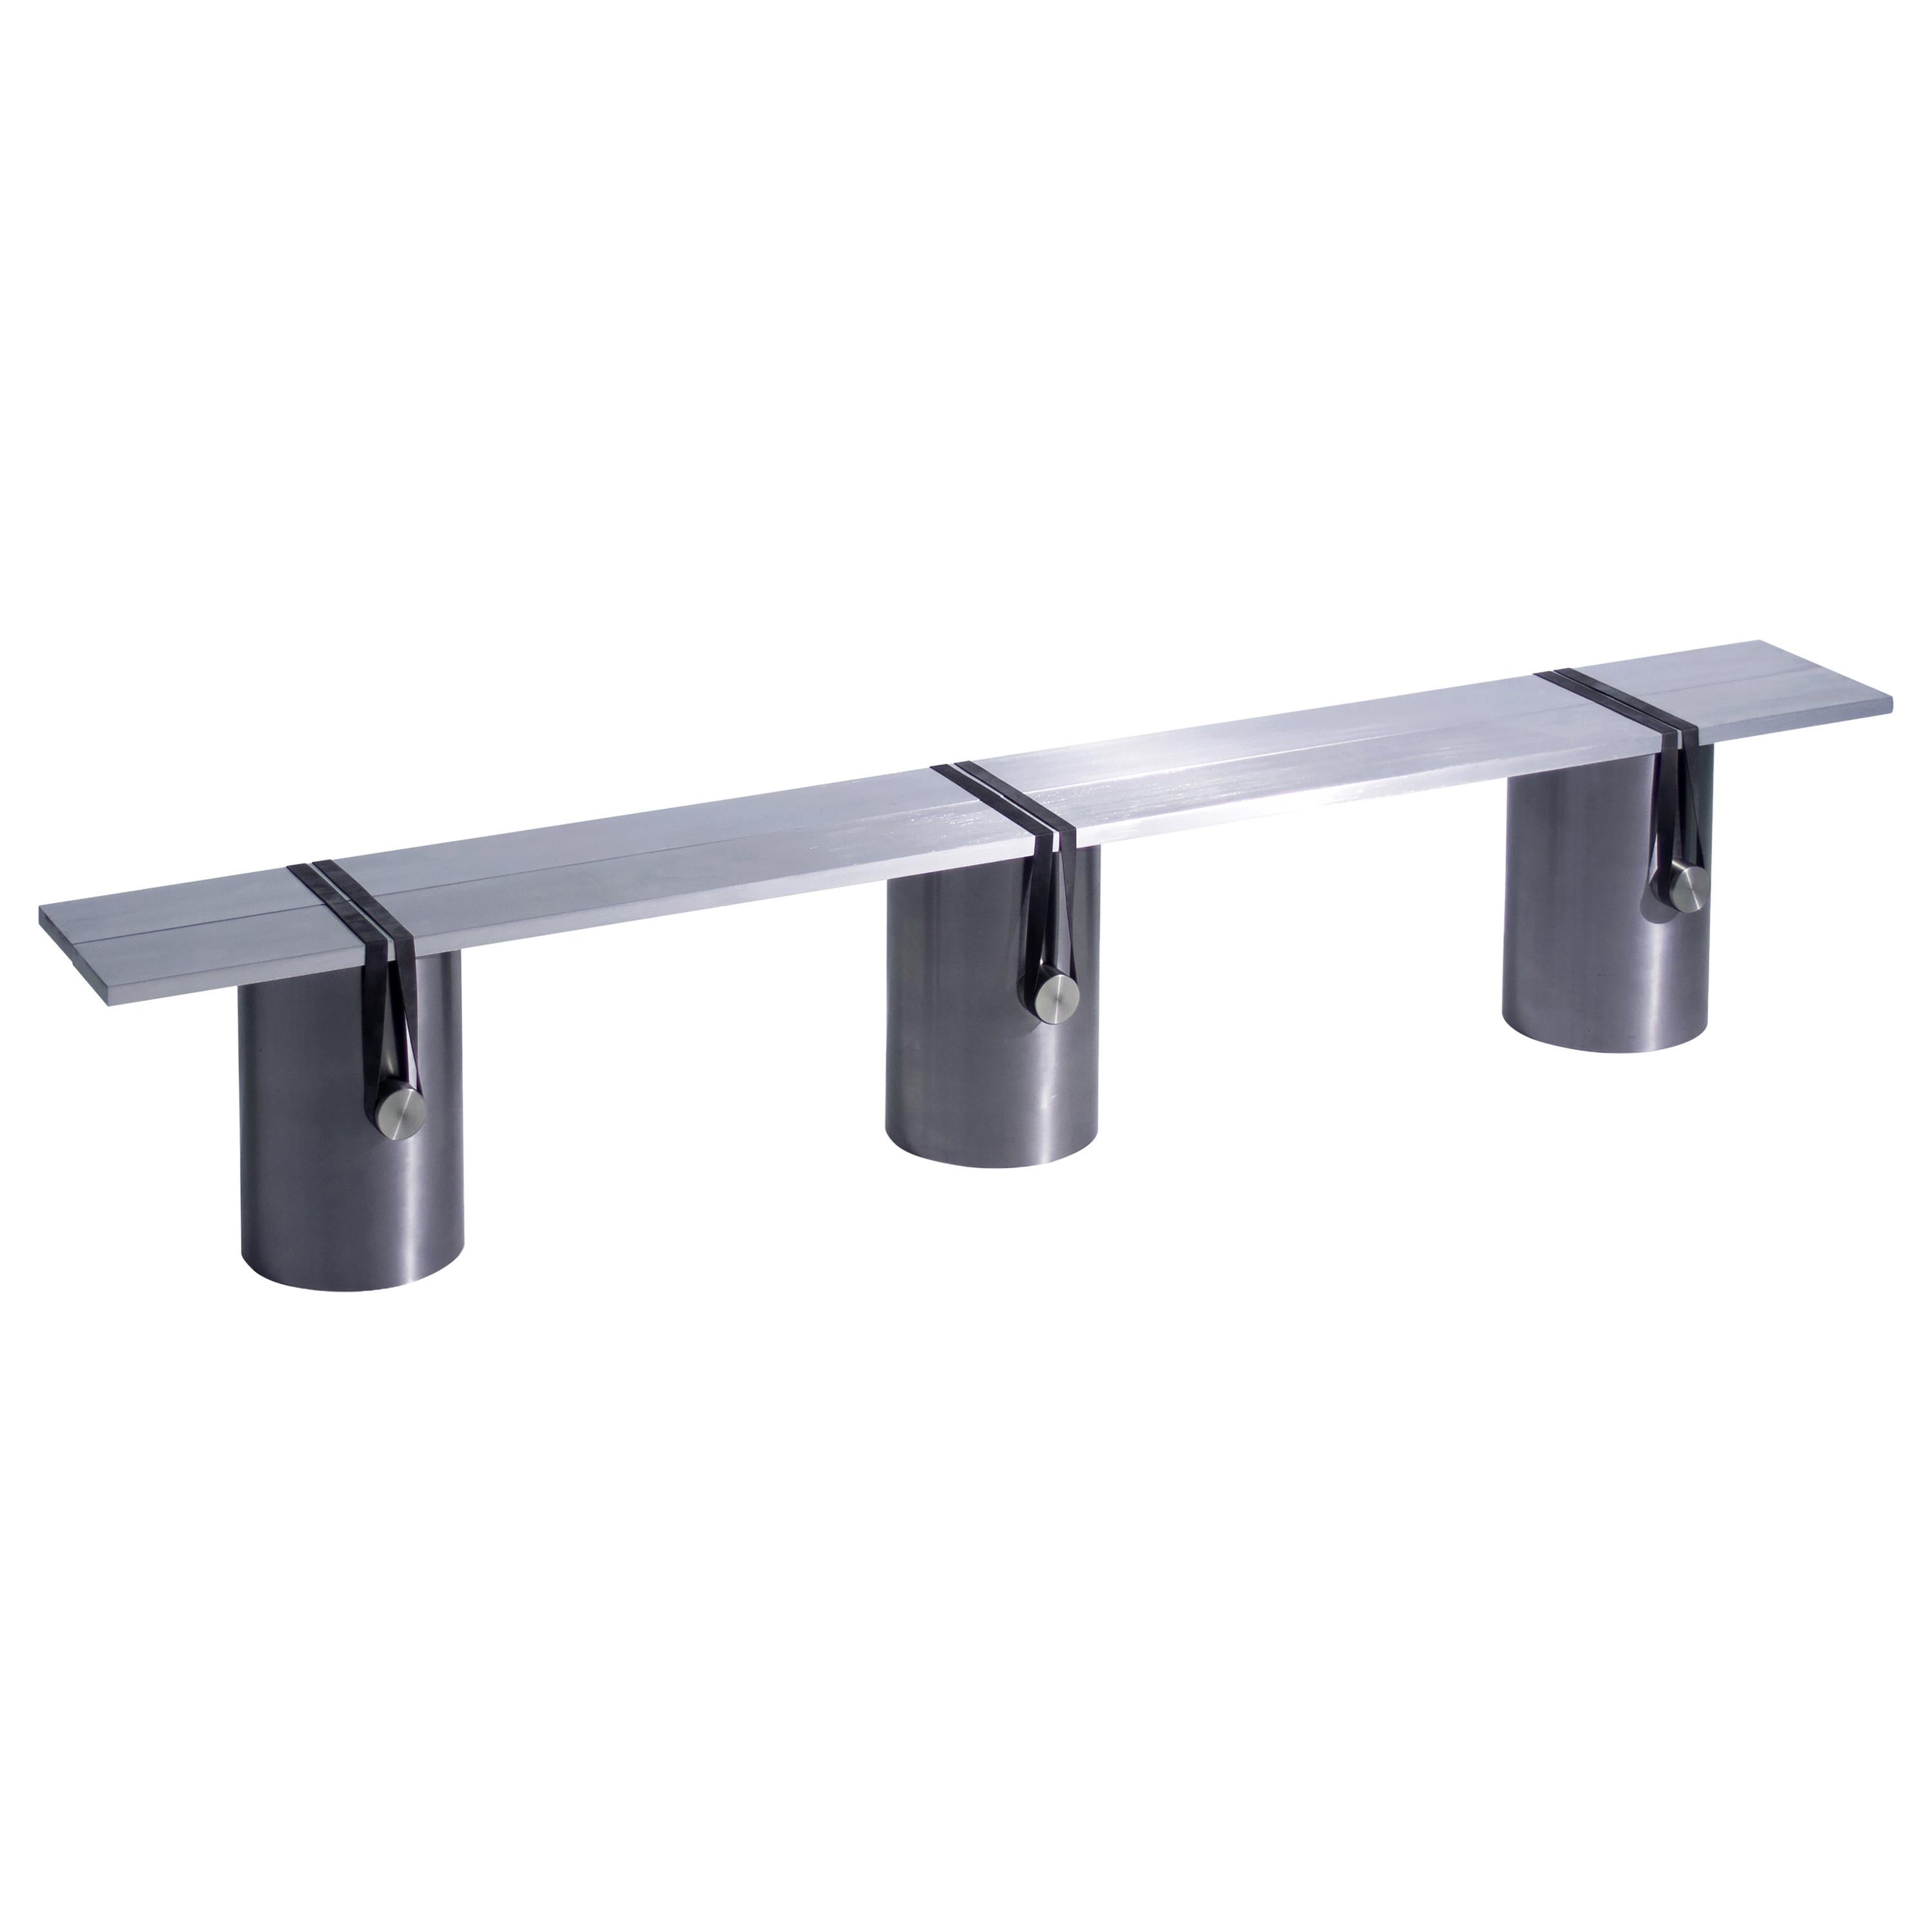 Stainless Steel Contemporary Bench by Johan Viladrich